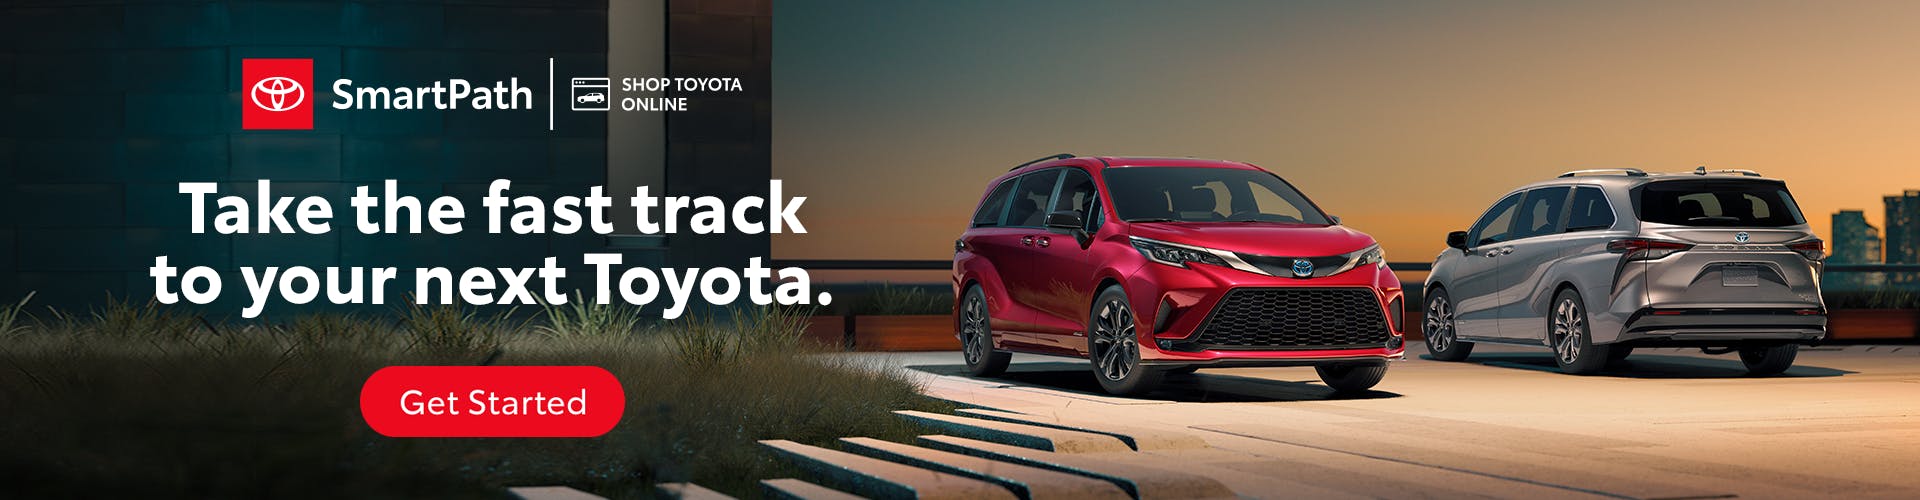 .SmartPath  – Find your next Toyota